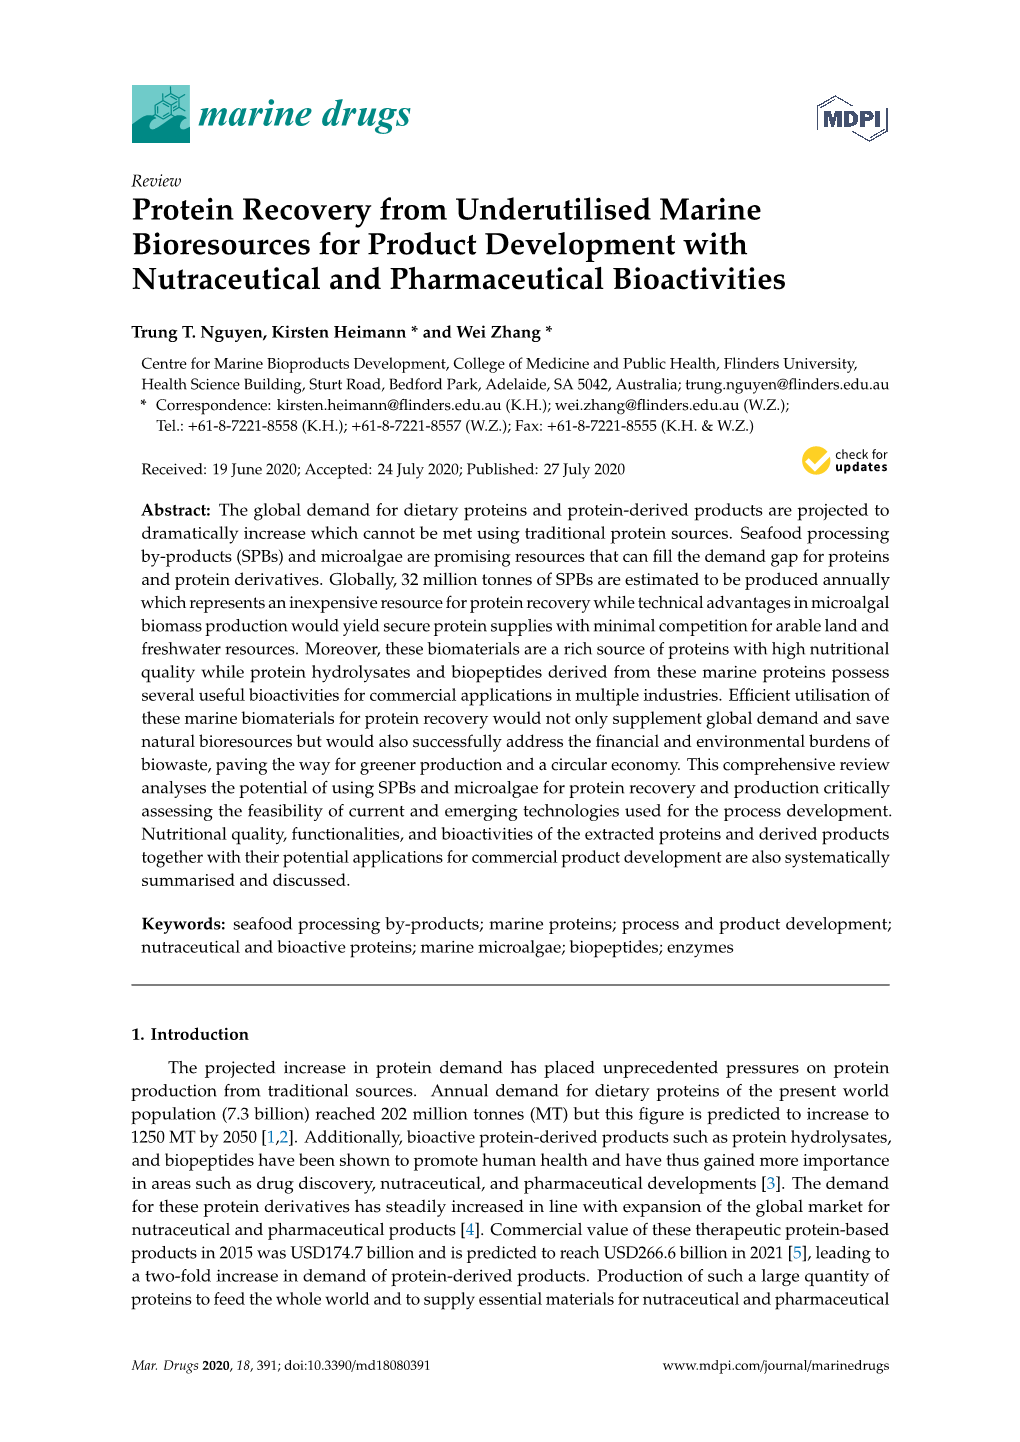 Protein Recovery from Underutilised Marine Bioresources for Product Development with Nutraceutical and Pharmaceutical Bioactivities